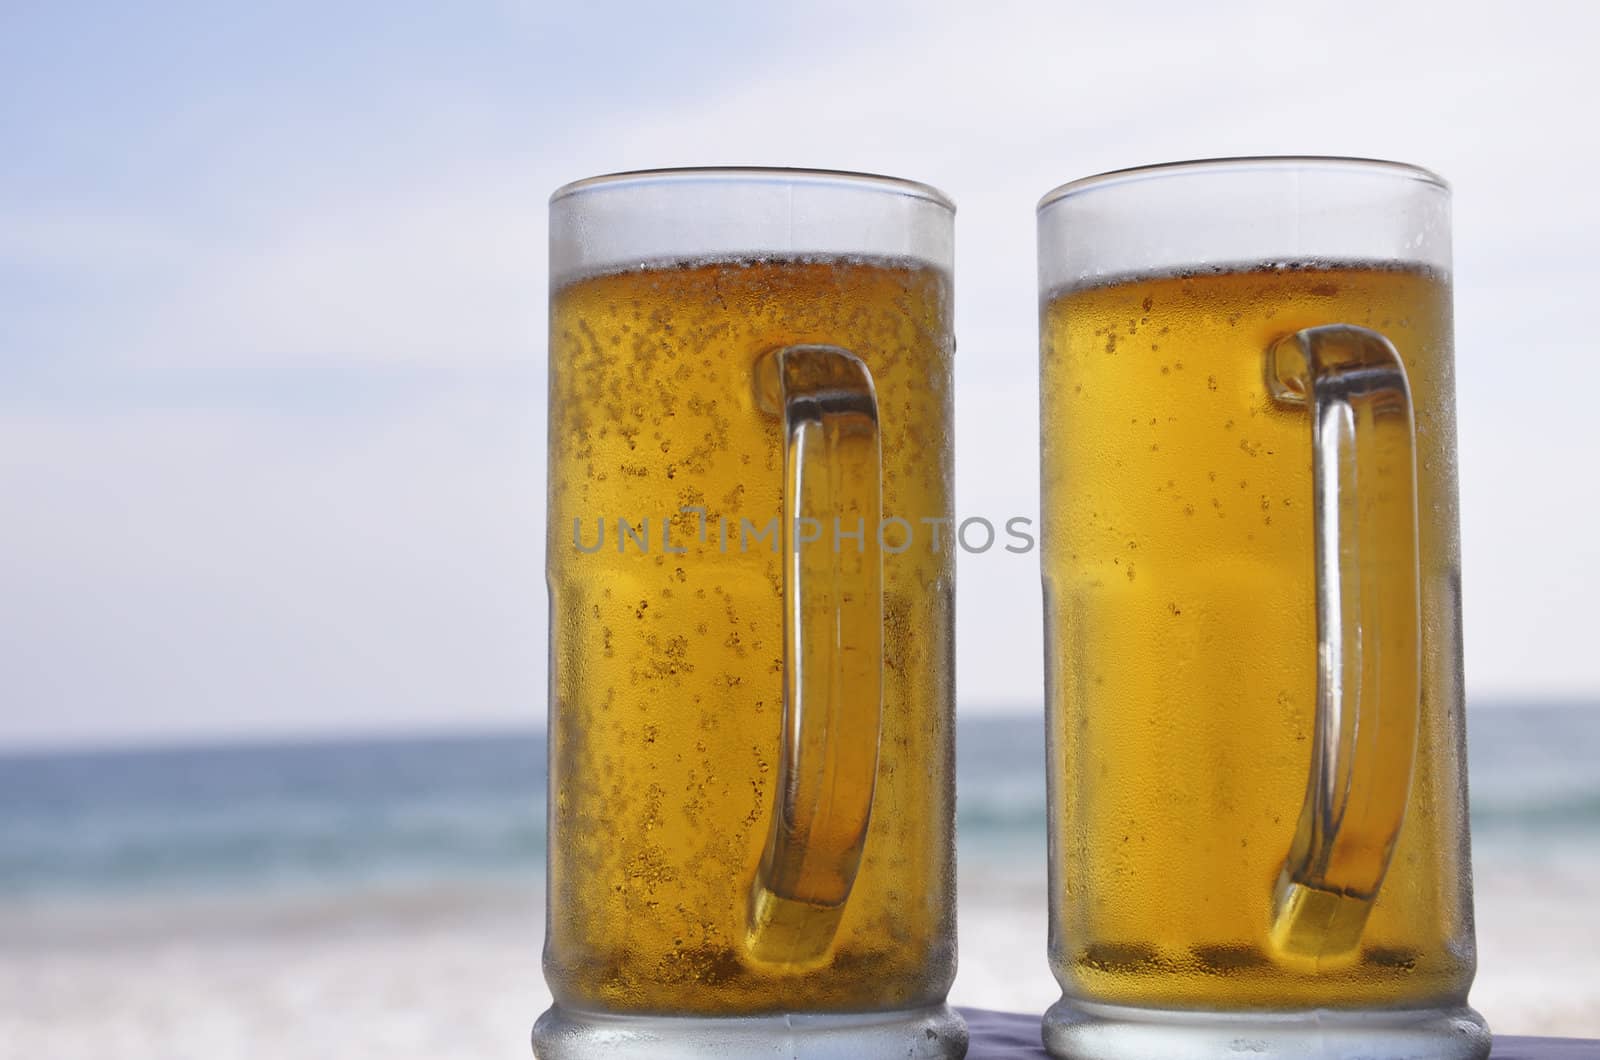 Two mugs of chilled Beer on a sunny day at the beach